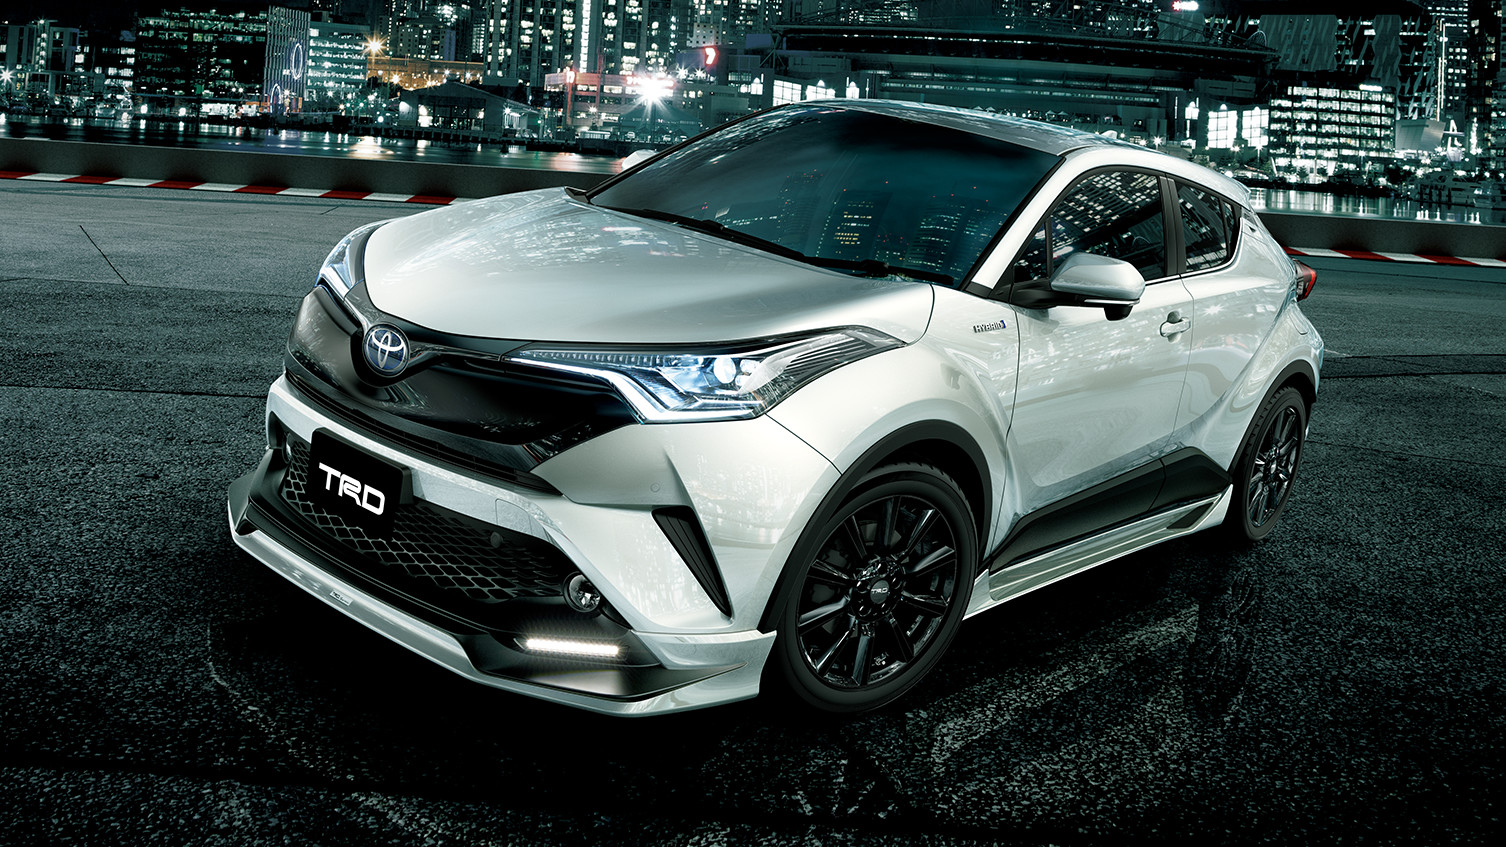 carlineup_c-hr_customize_trd_aggressivestyle_large_01